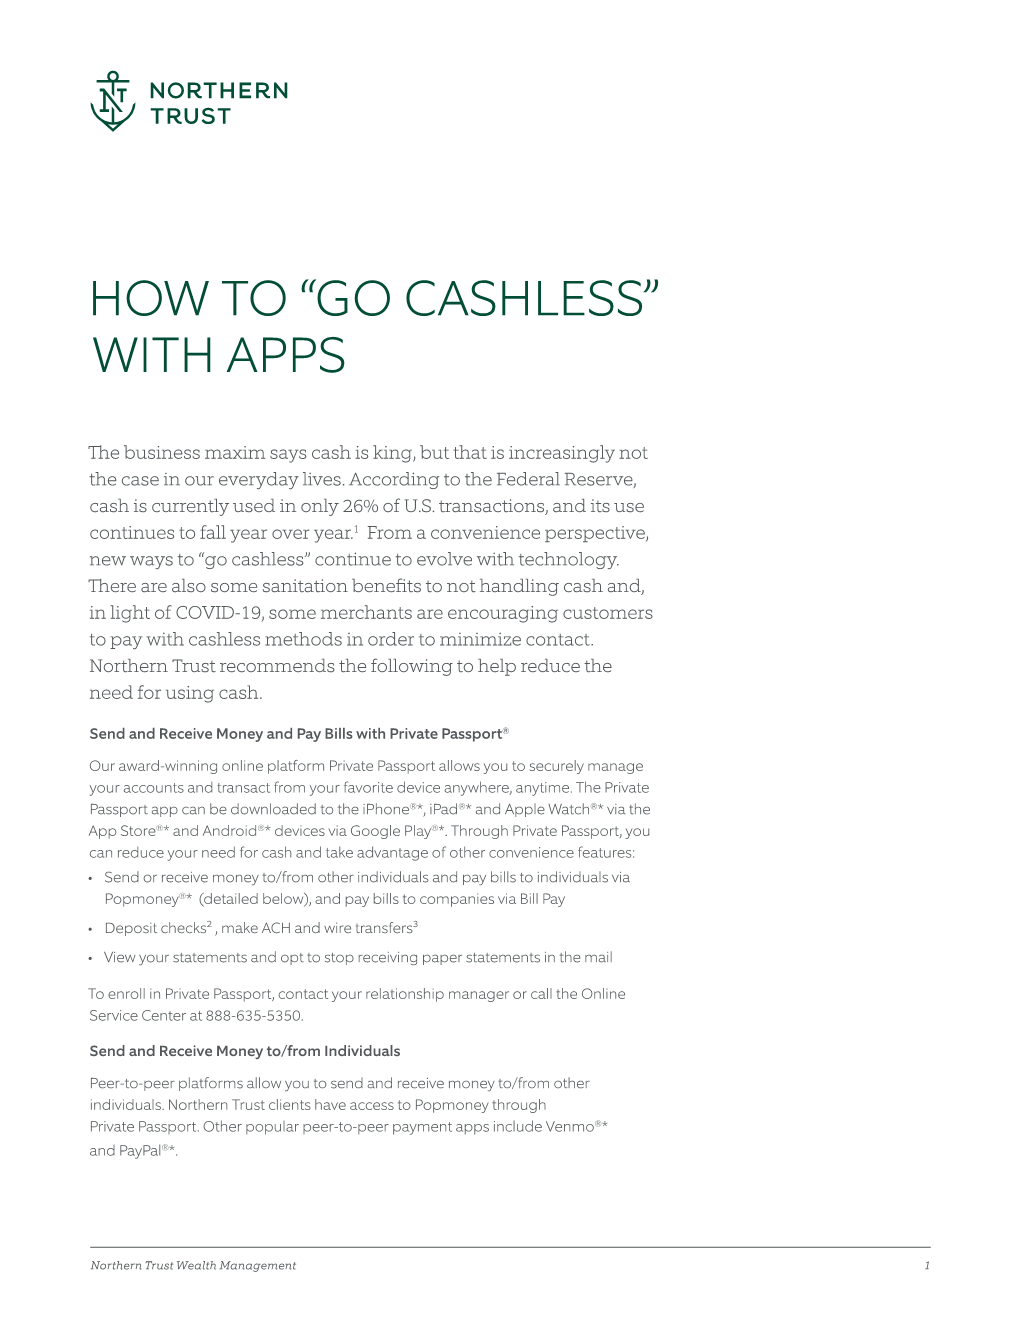 How to “Go Cashless” with Apps